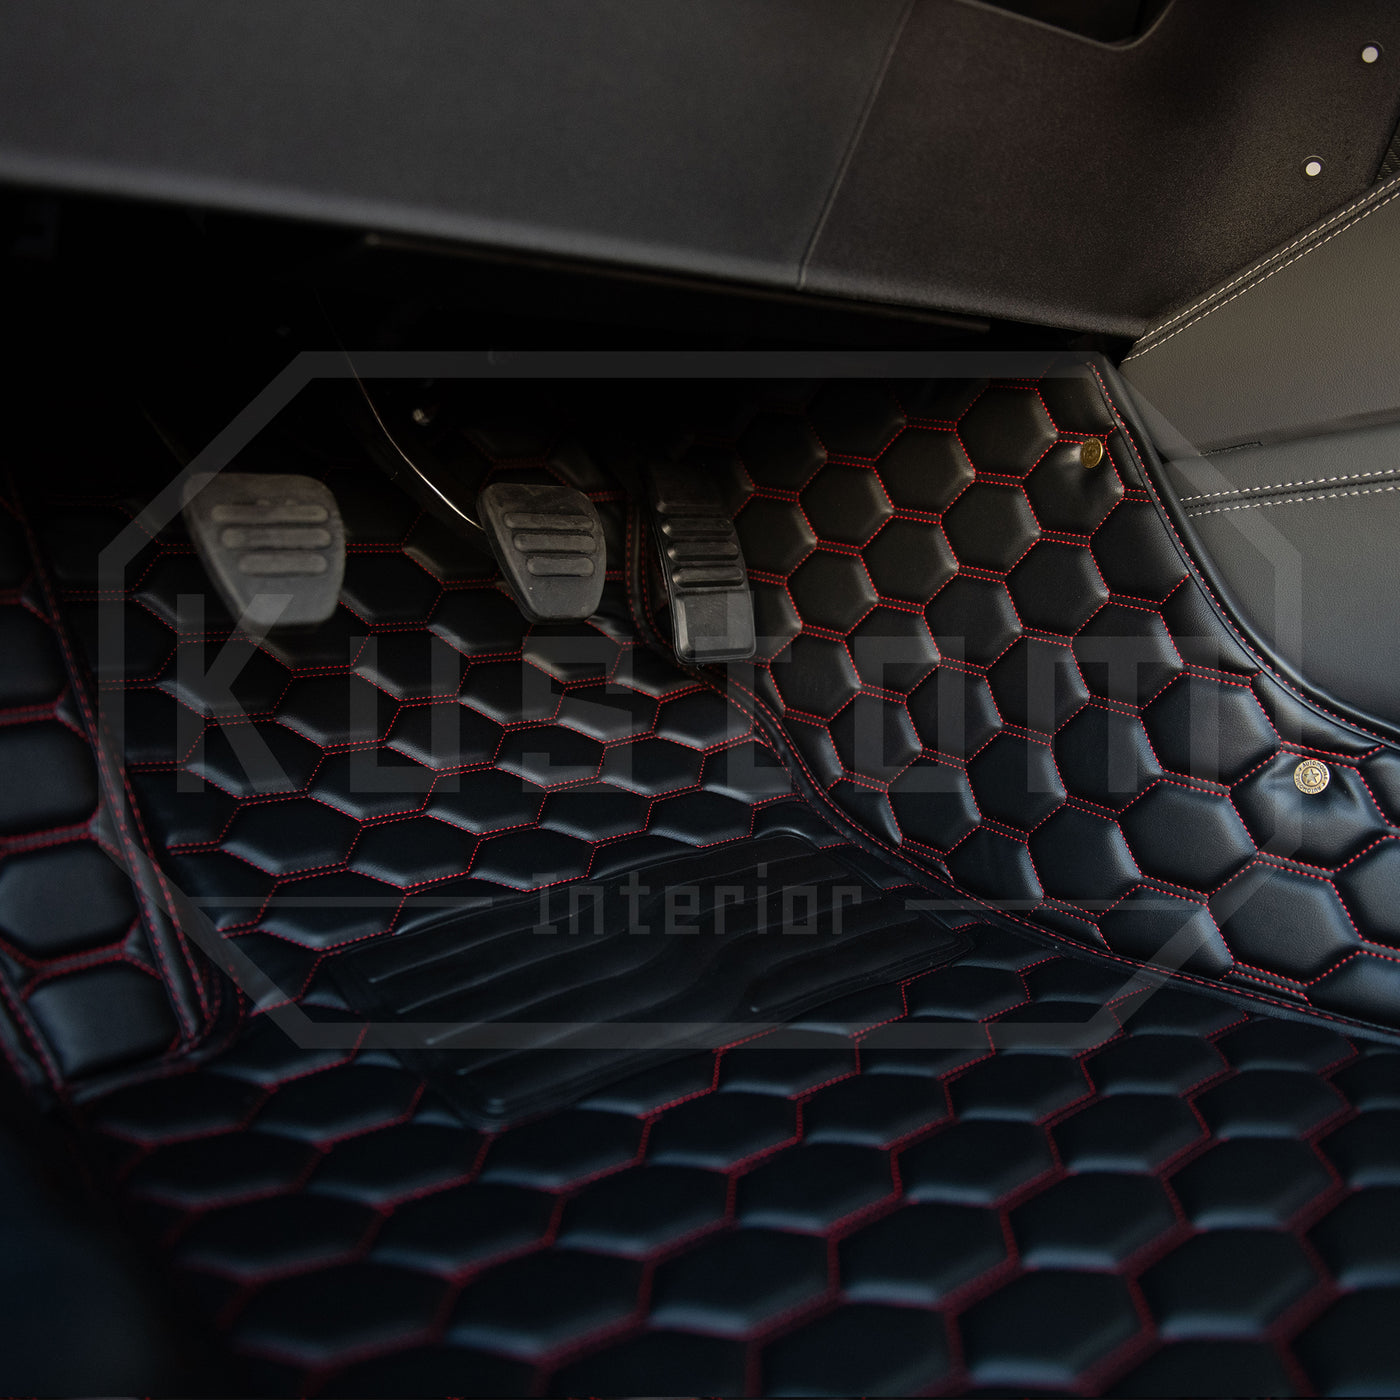 2015-Up Ford Mustang Premium Honeycomb Leather Floor Mat Liners